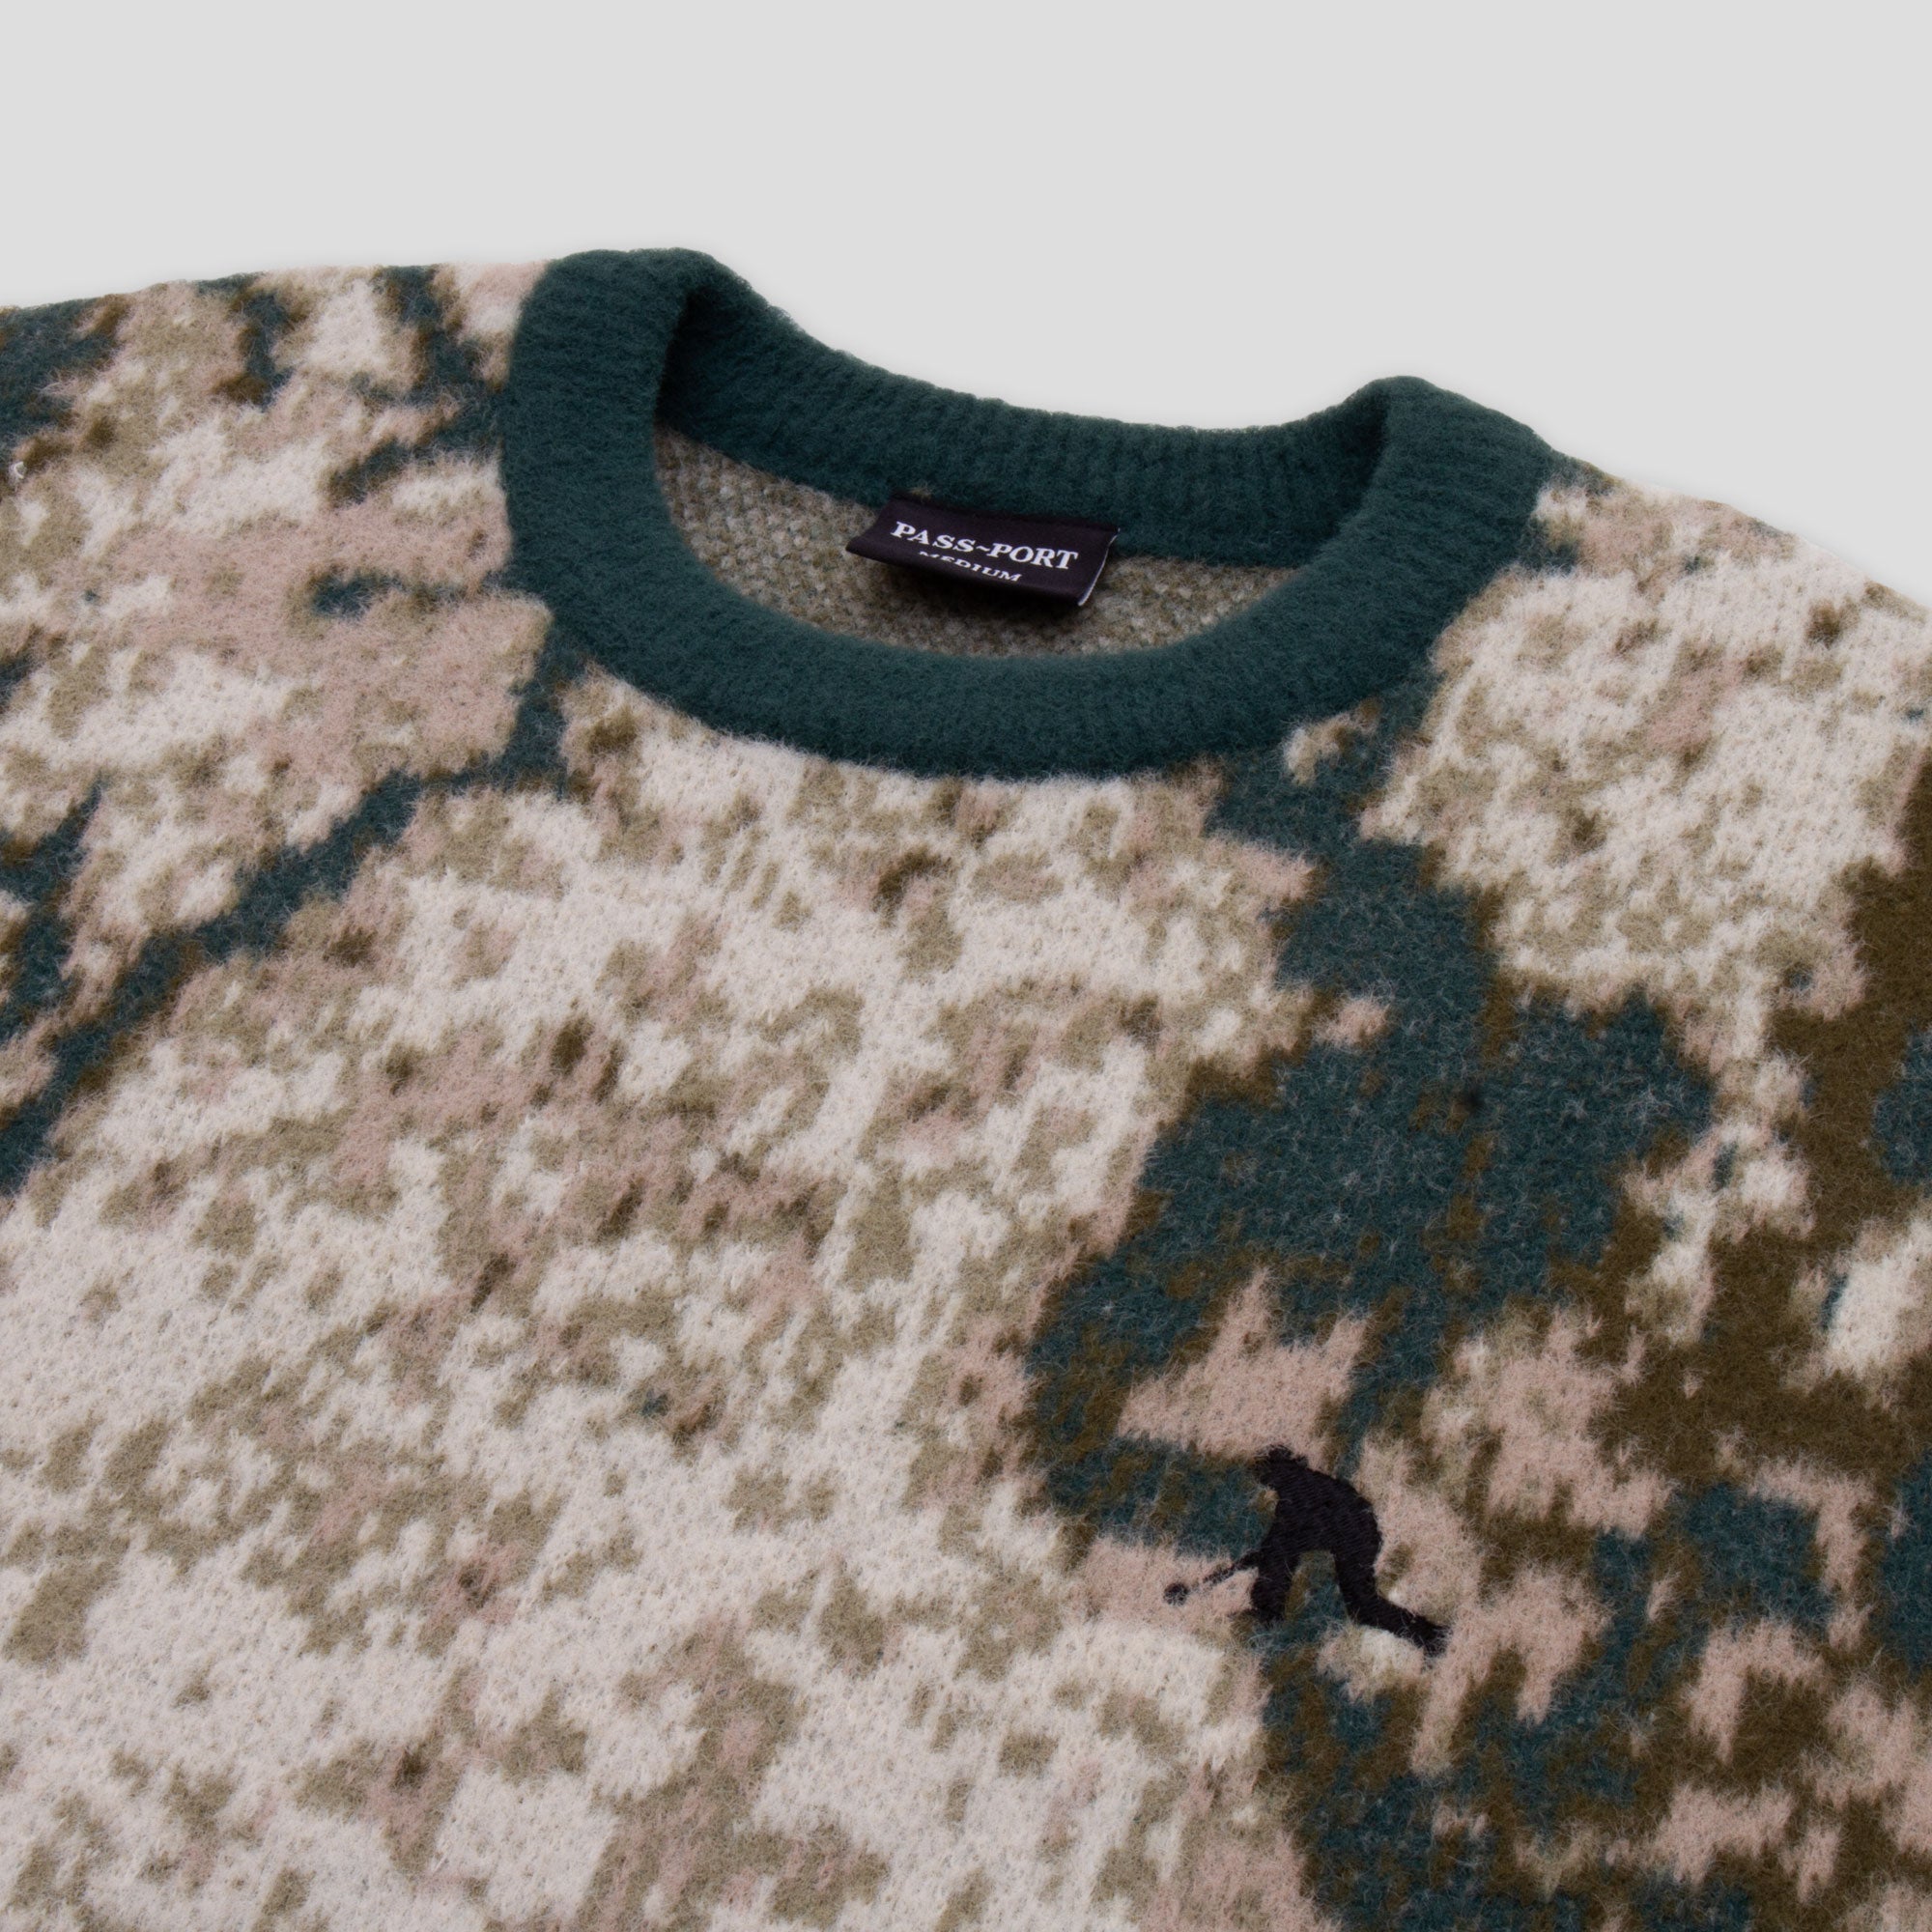 Carpet Club Sweater (Forest)